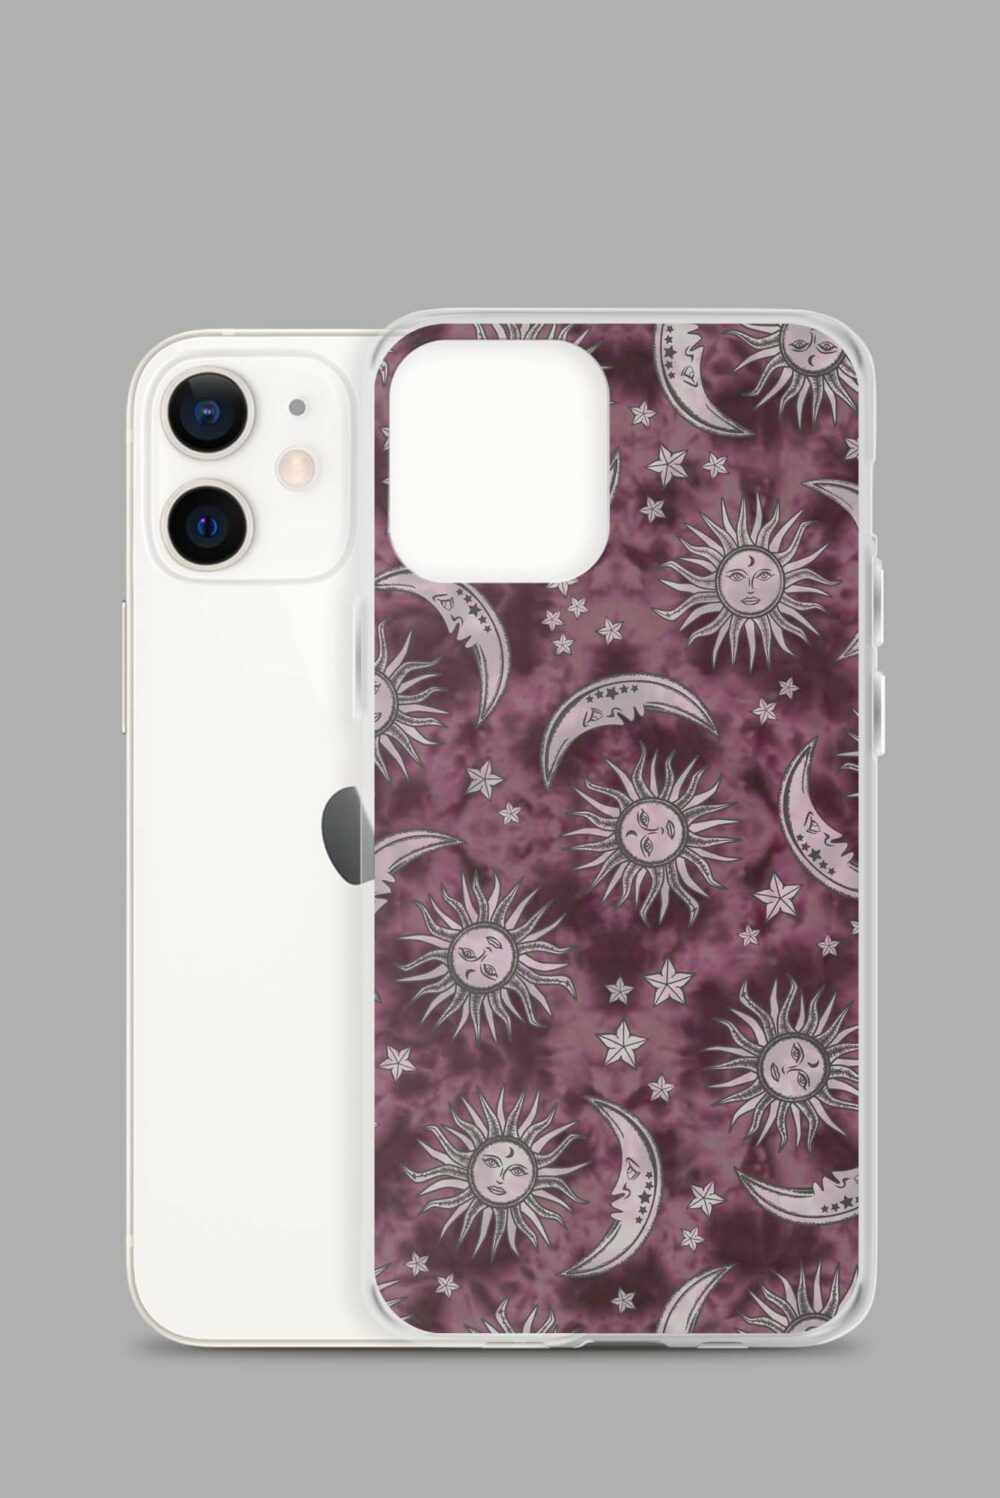 pink suns moons clear case for iphone iphone 12 mini case with phone 64e266194991a